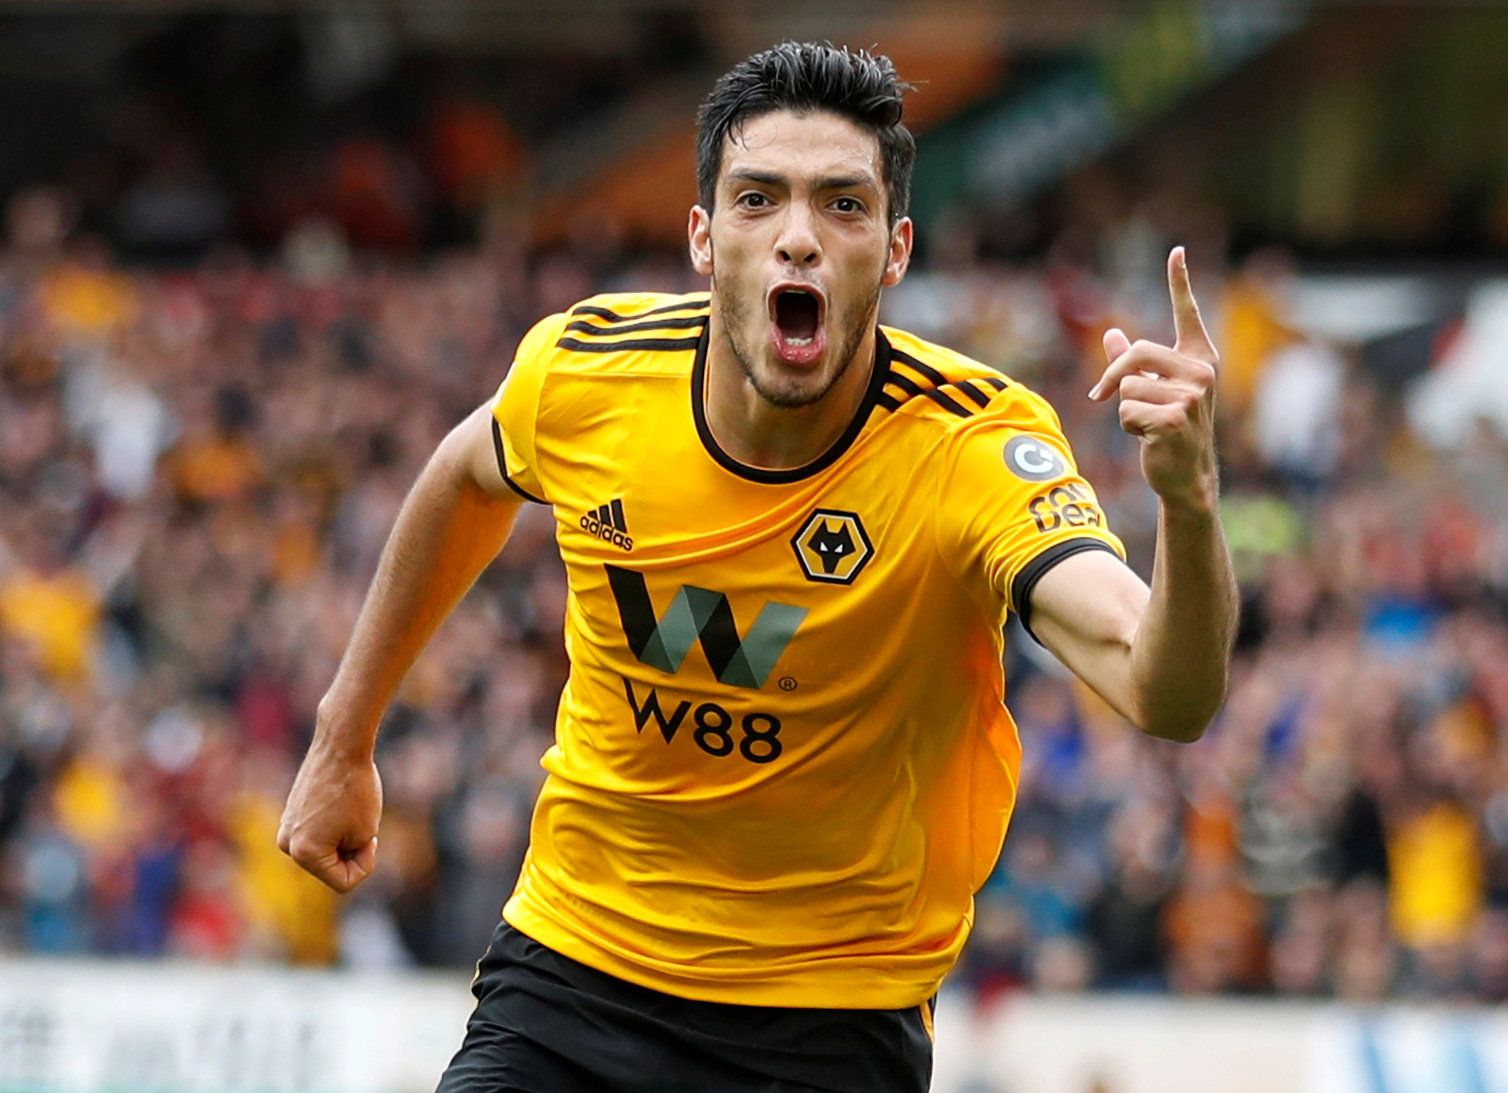 Soccer Football - Premier League - Wolverhampton Wanderers v Burnley - Molineux Stadium, Wolverhampton, Britain - September 16, 2018  Wolverhampton Wanderers' Raul Jimenez celebrates scoring their first goal   Action Images via Reuters/Carl Recine  EDITORIAL USE ONLY. No use with unauthorized audio, video, data, fixture lists, club/league logos or 